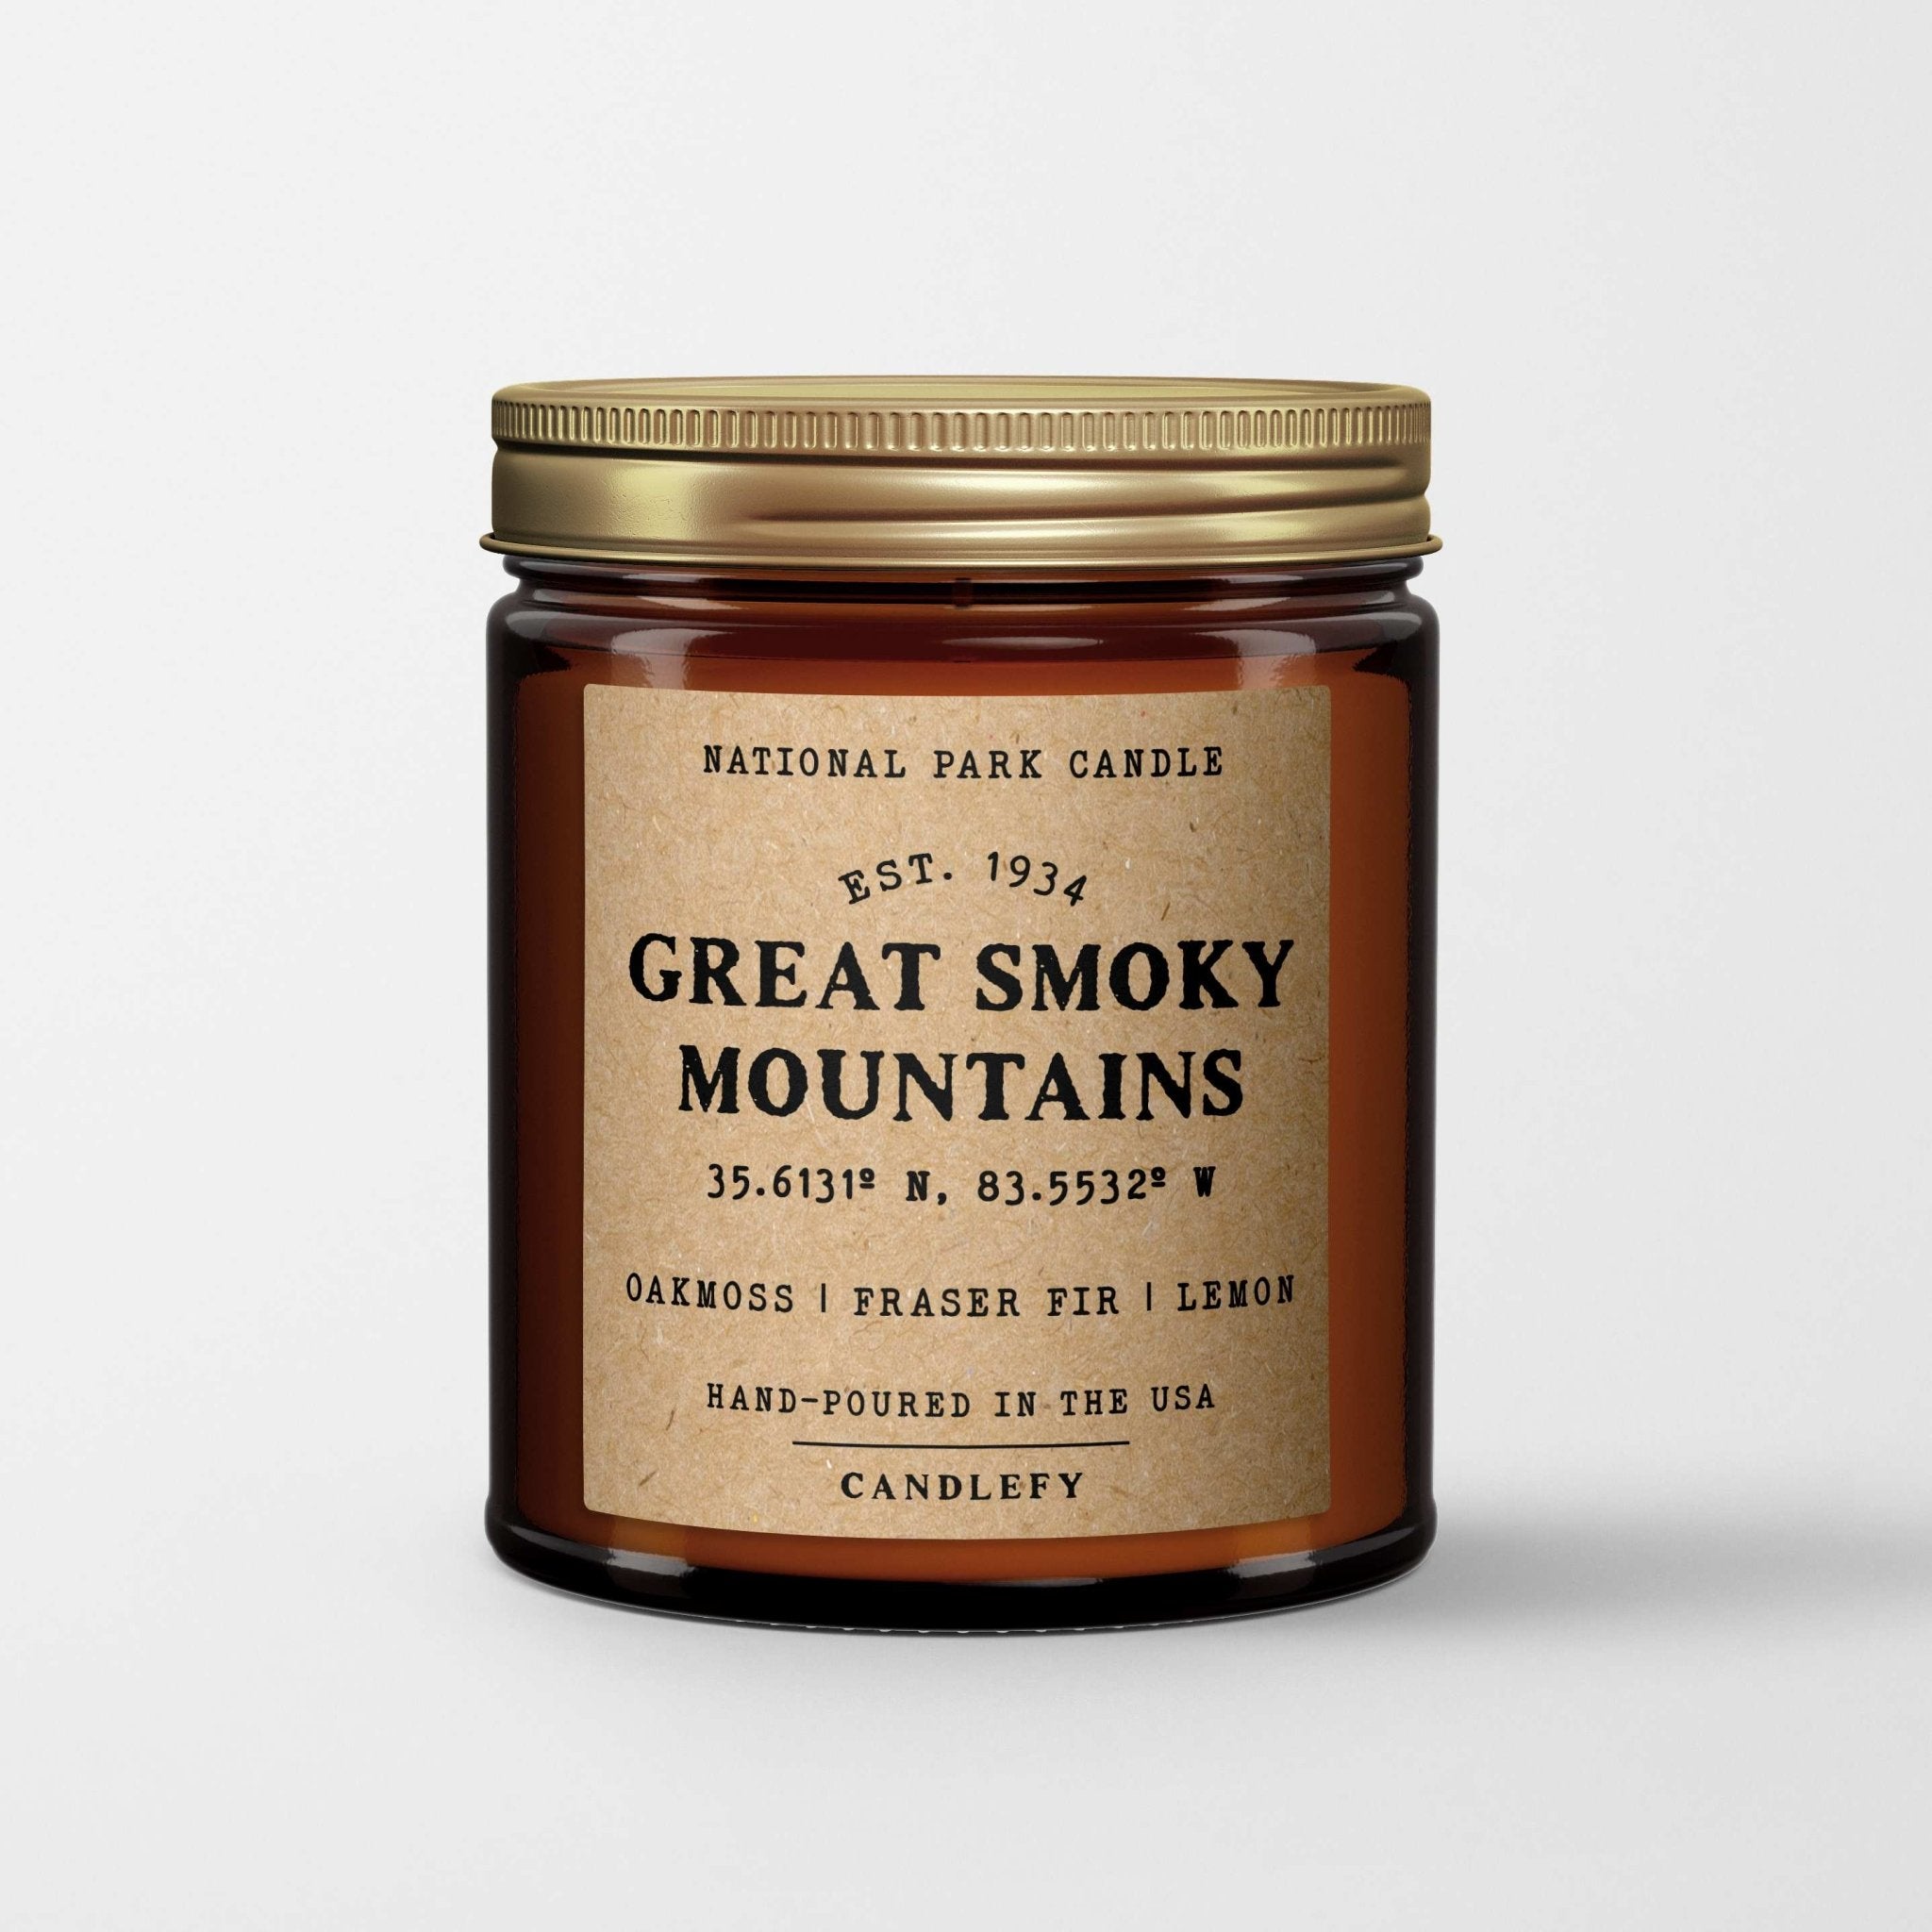 Great Smoky Mountains National Park Candle - Candlefy